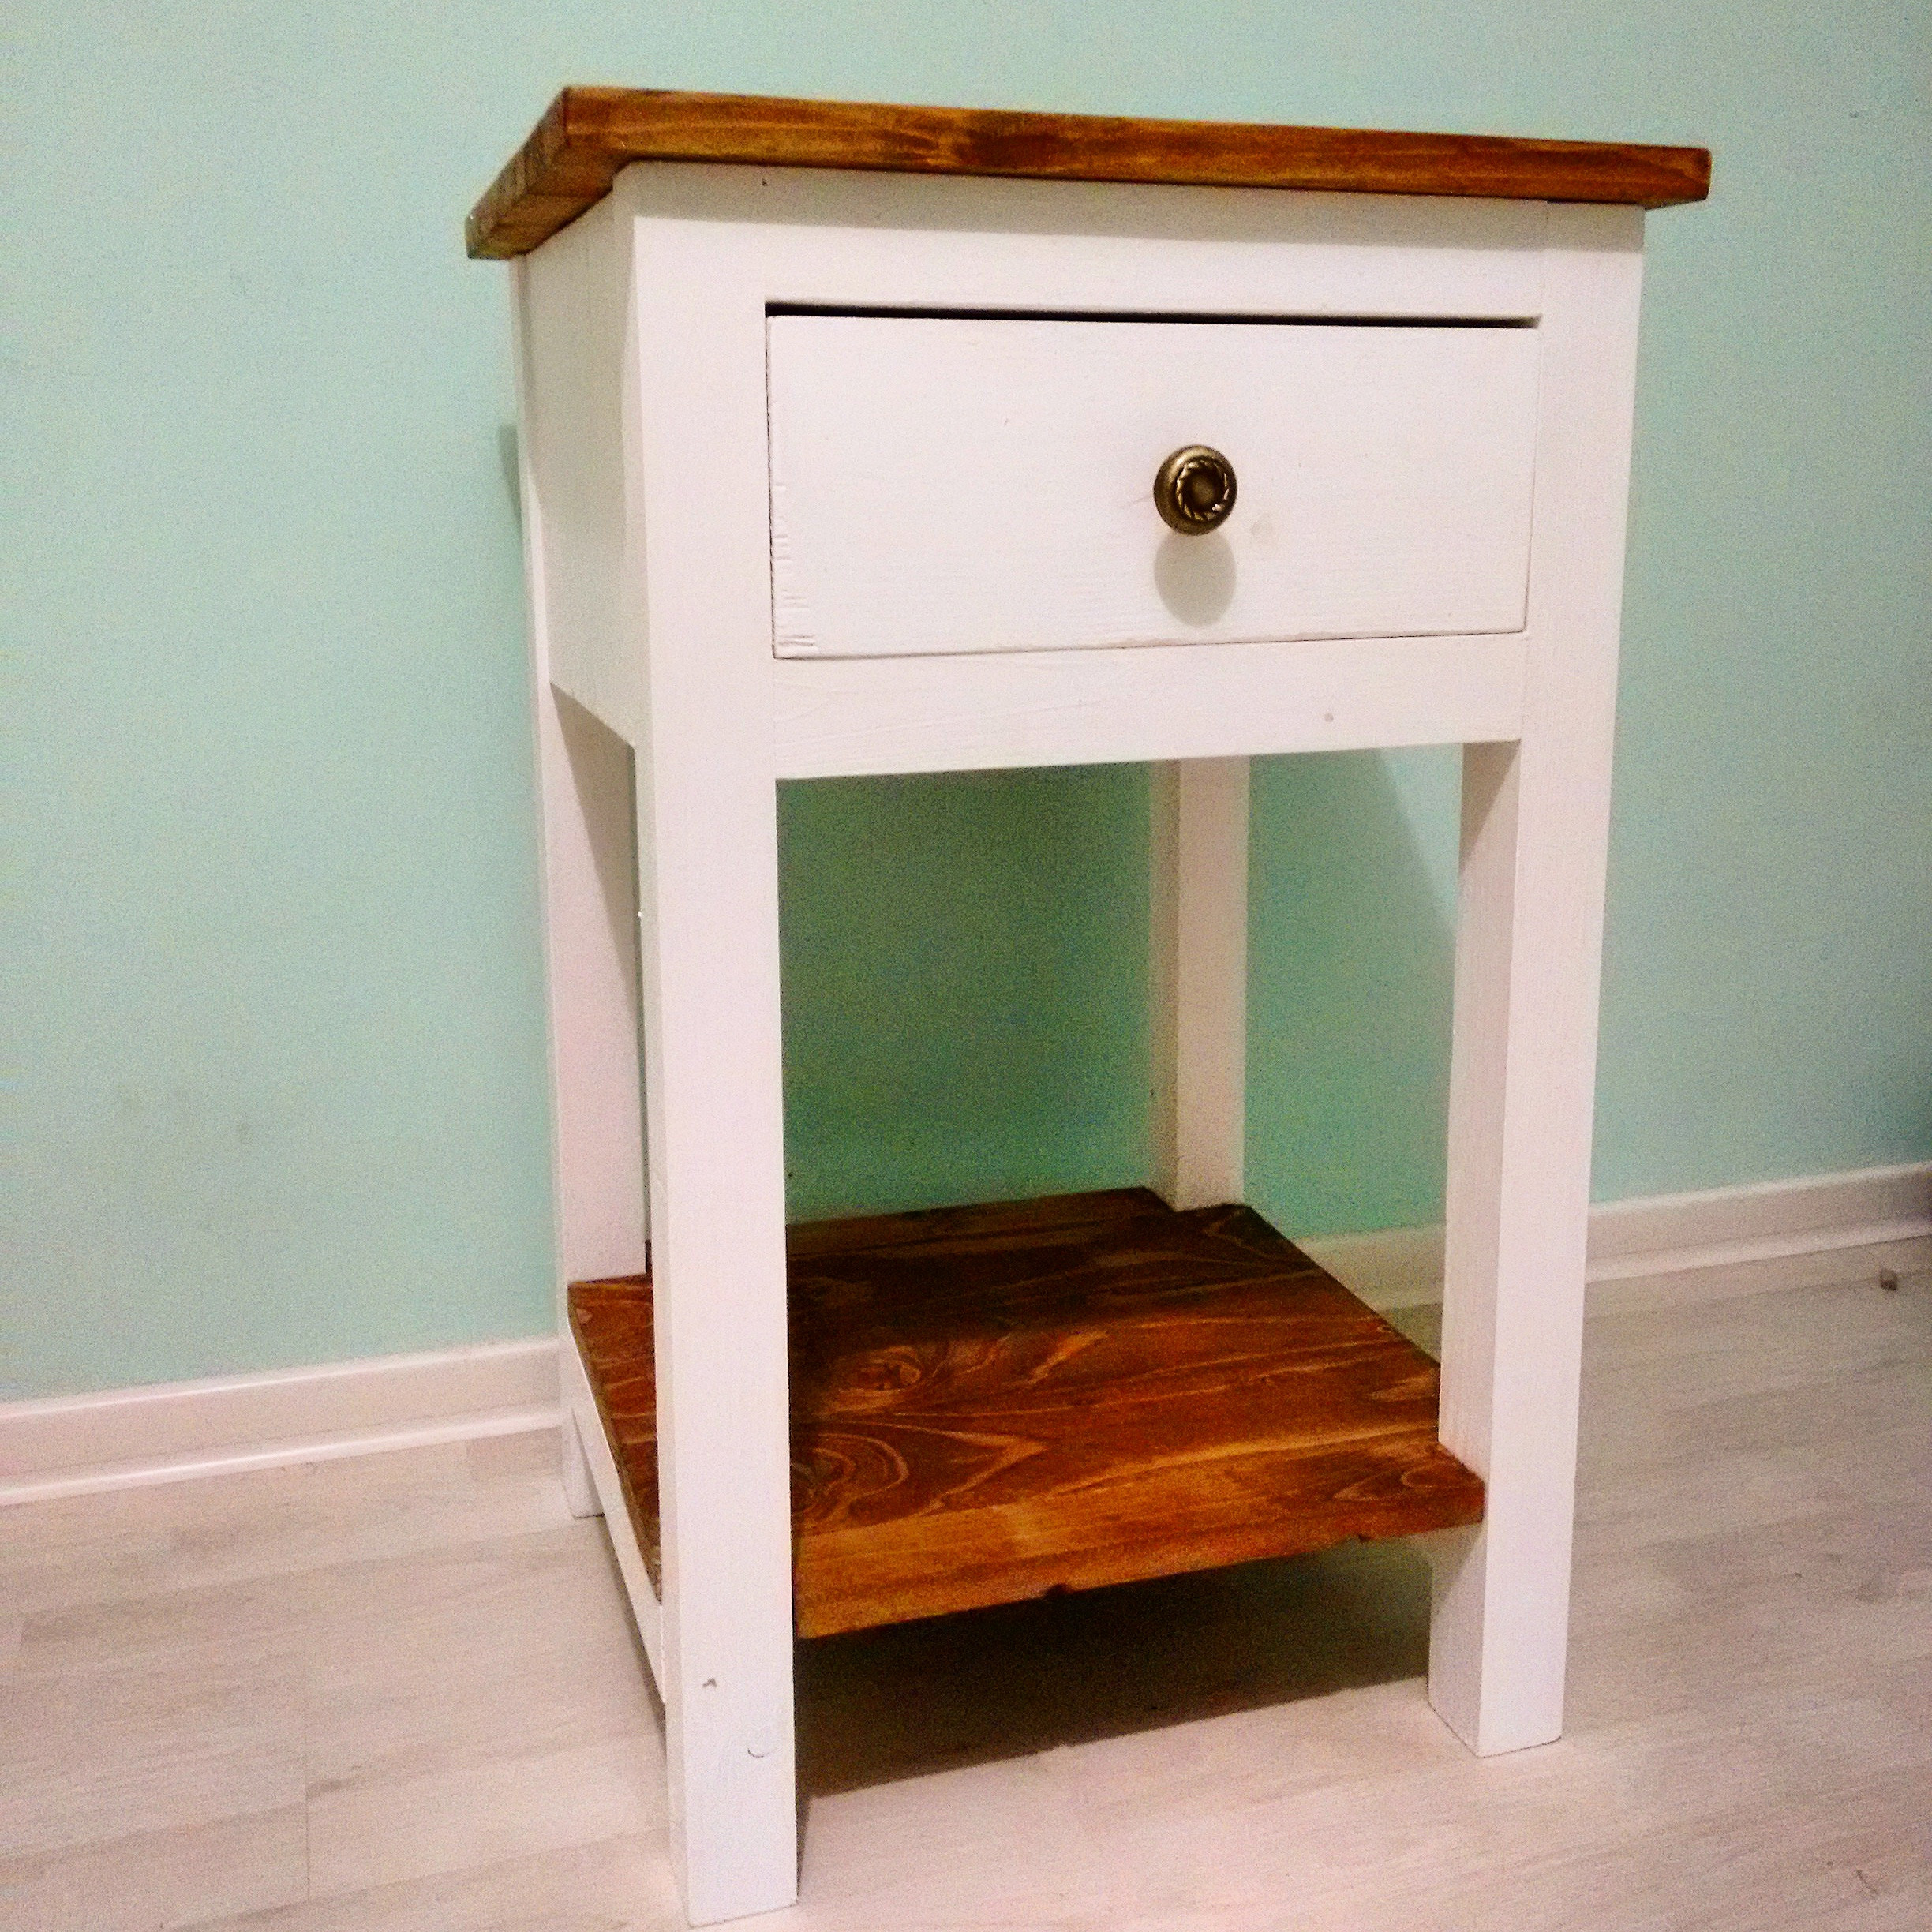 DIY Nightstands Plans
 How to build a farmhouse nightstand